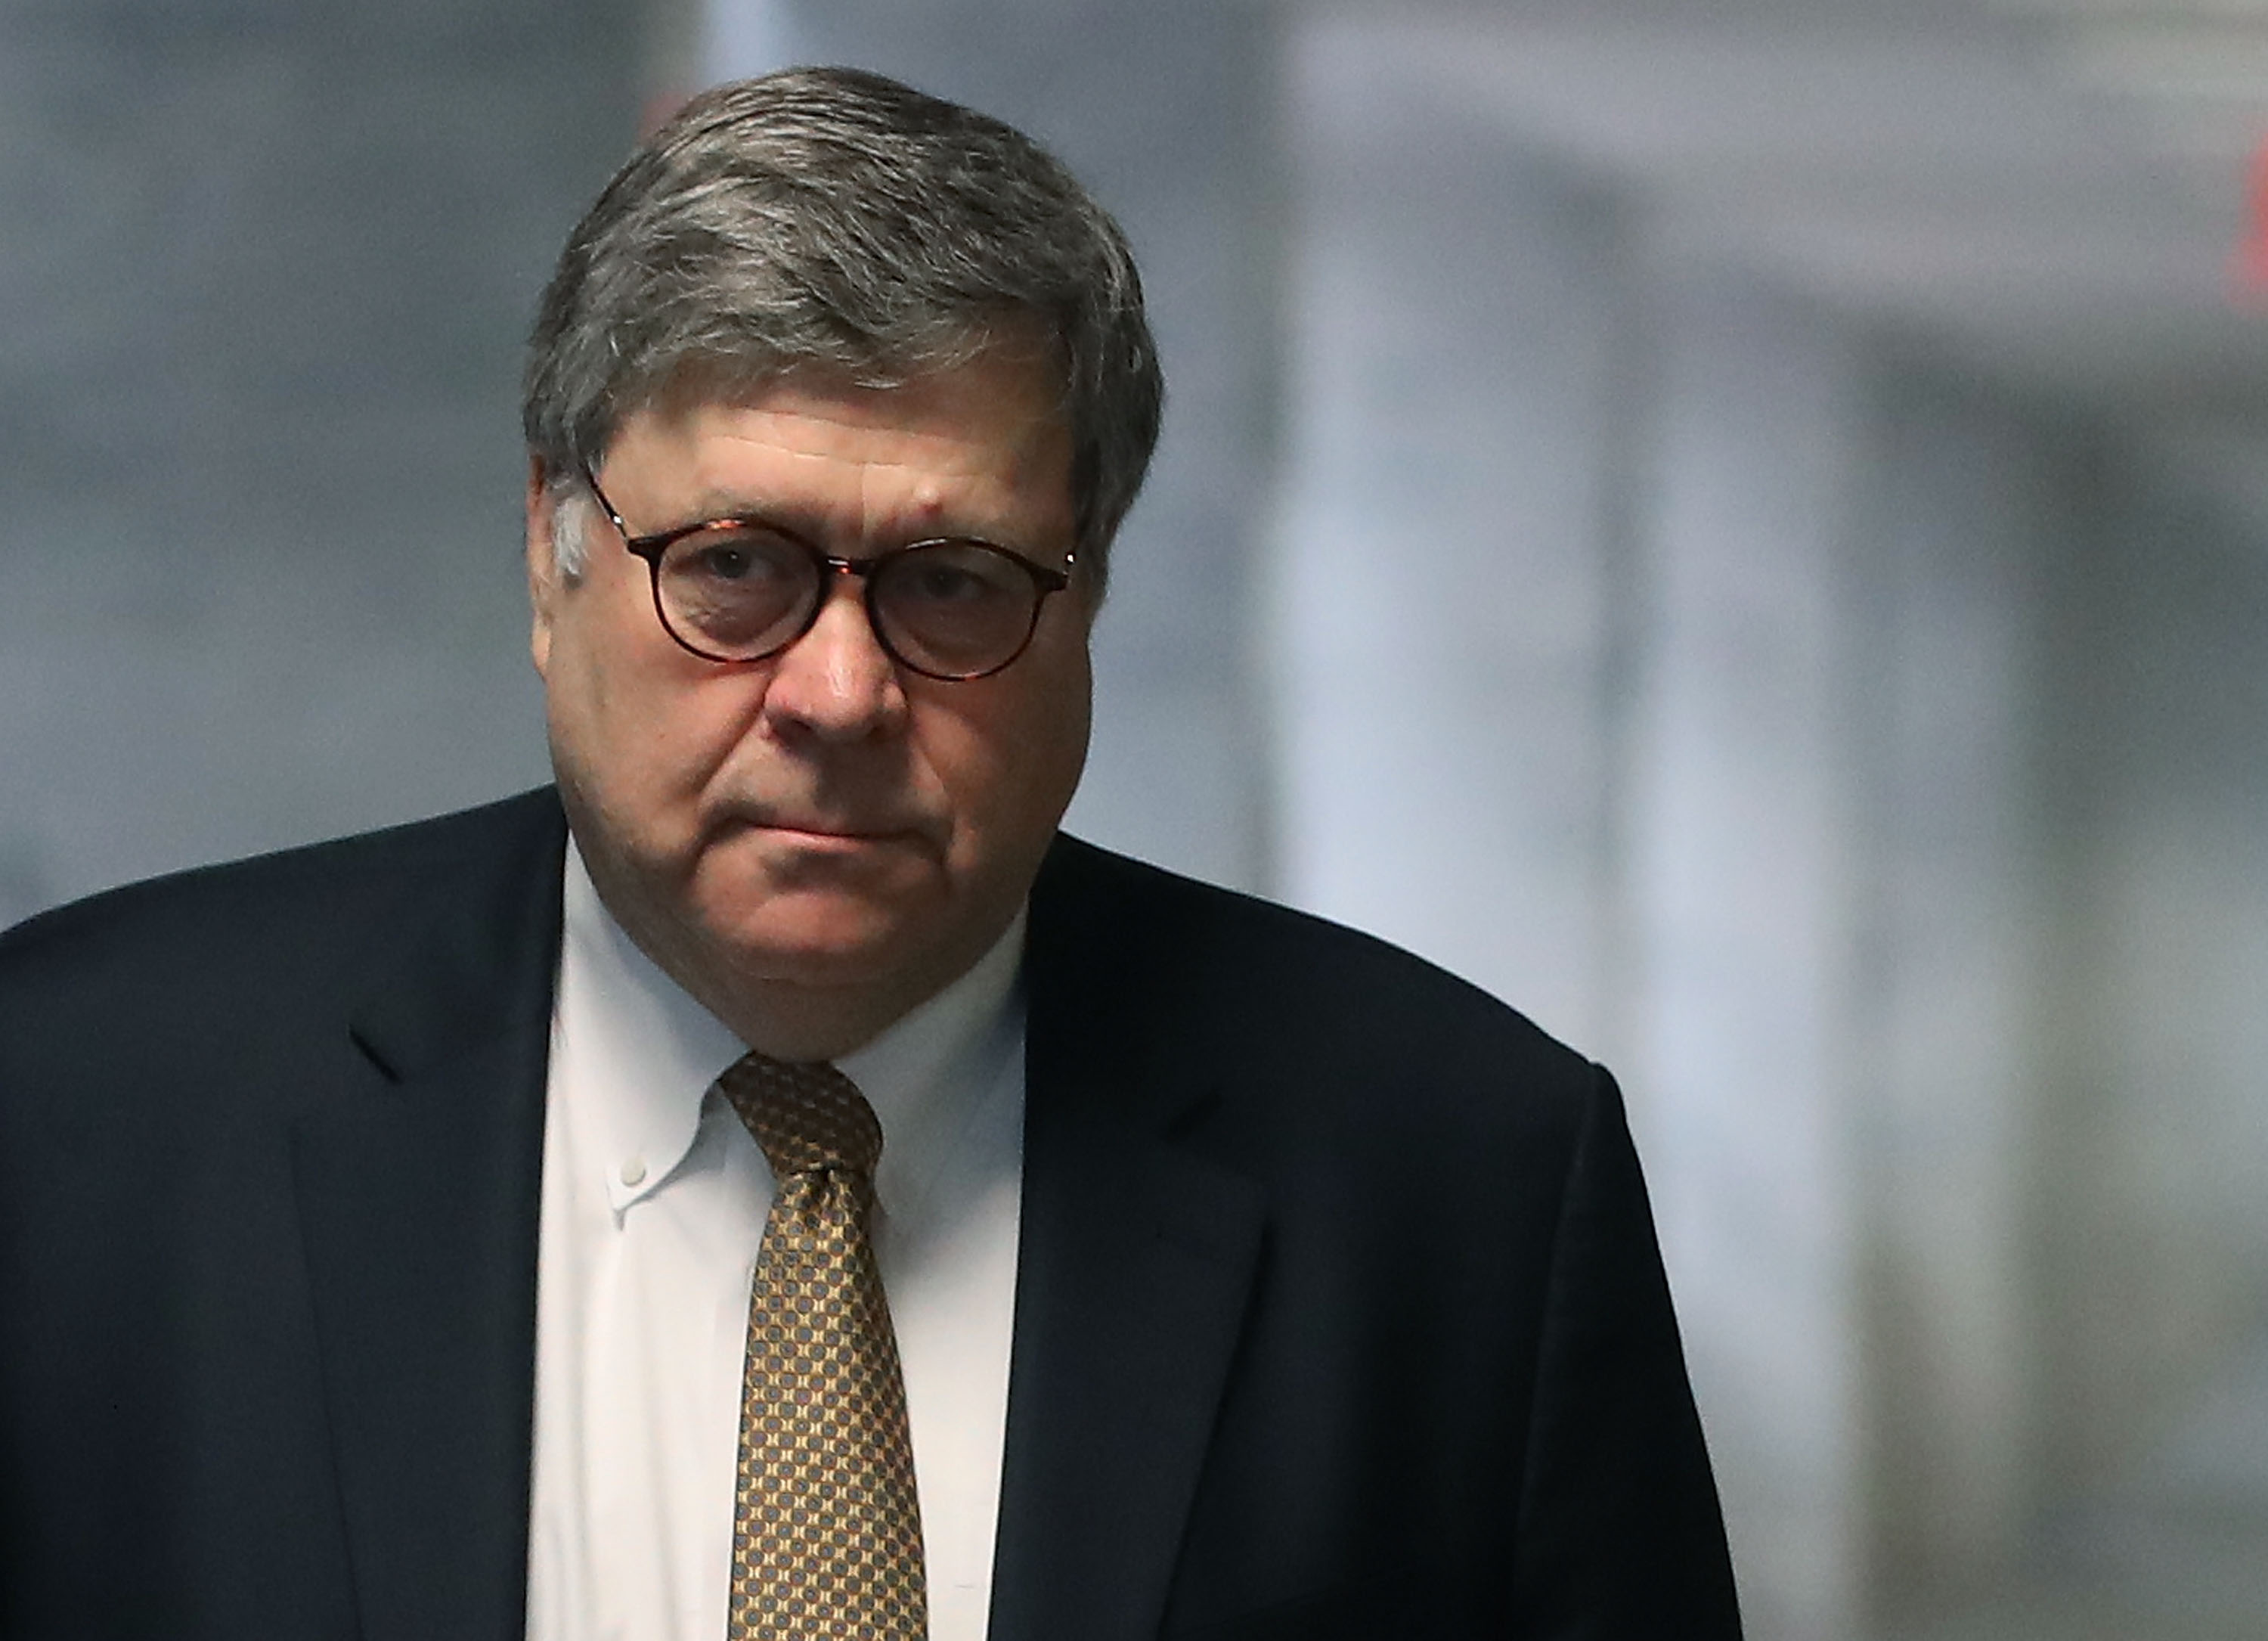 William Barr on Capitol Hill